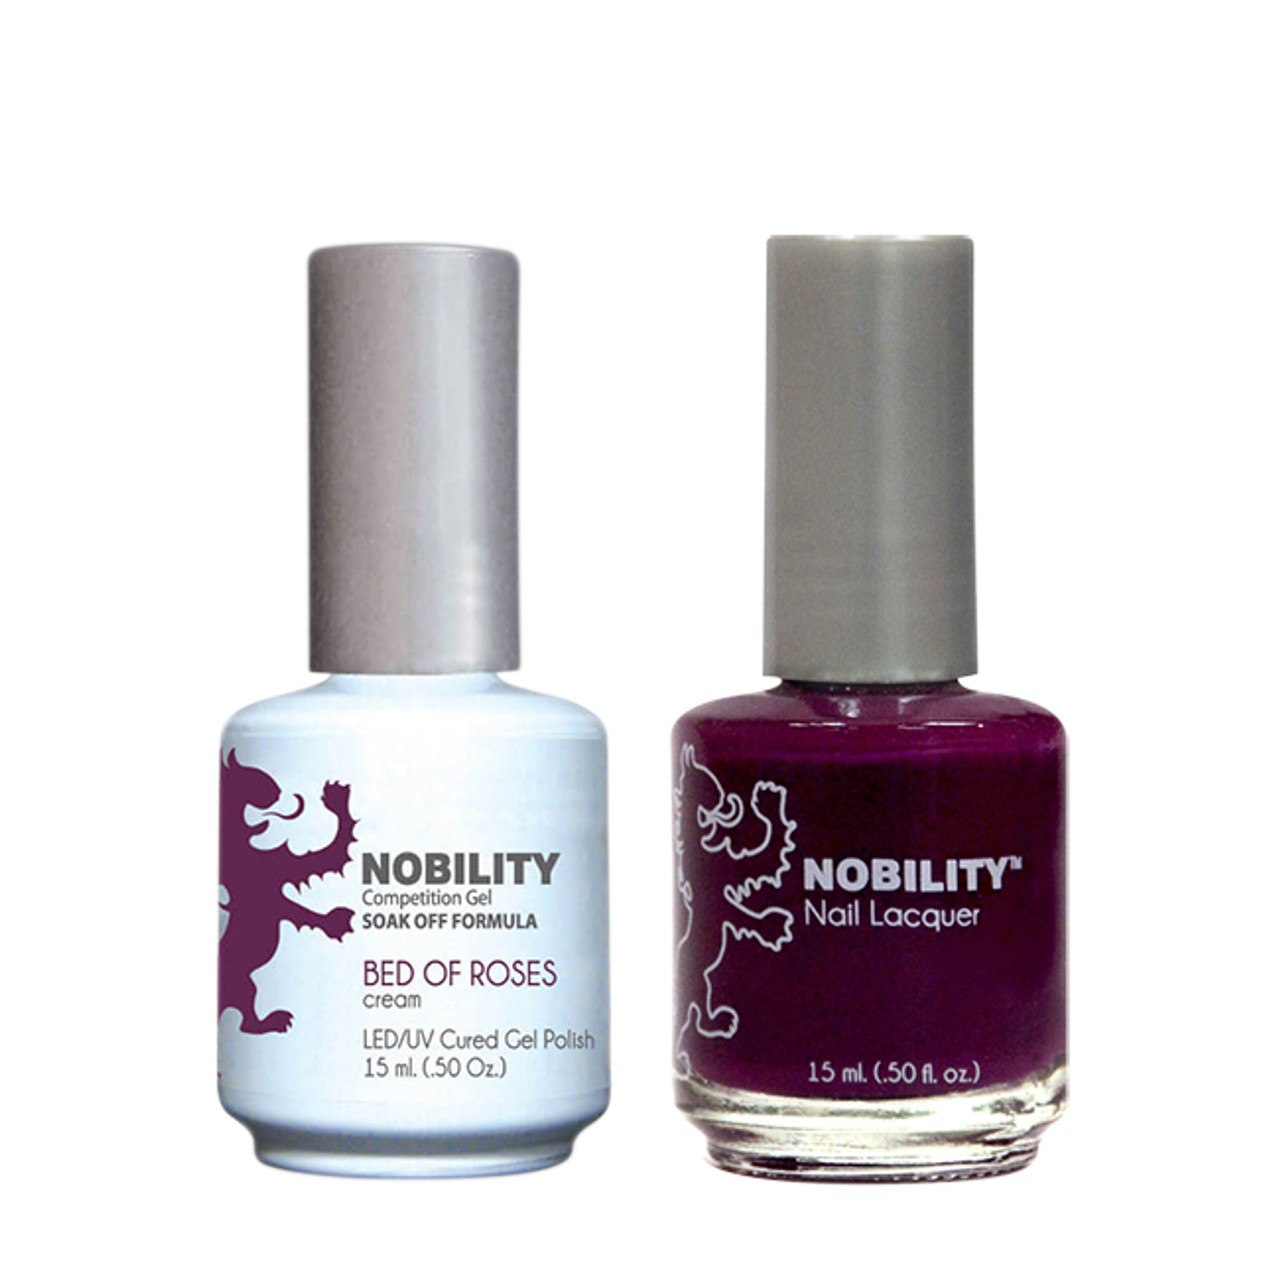 LeChat Nobility Gel Polish & Nail Lacquer Duo Set Bed of Roses - .5 oz / 15 ml